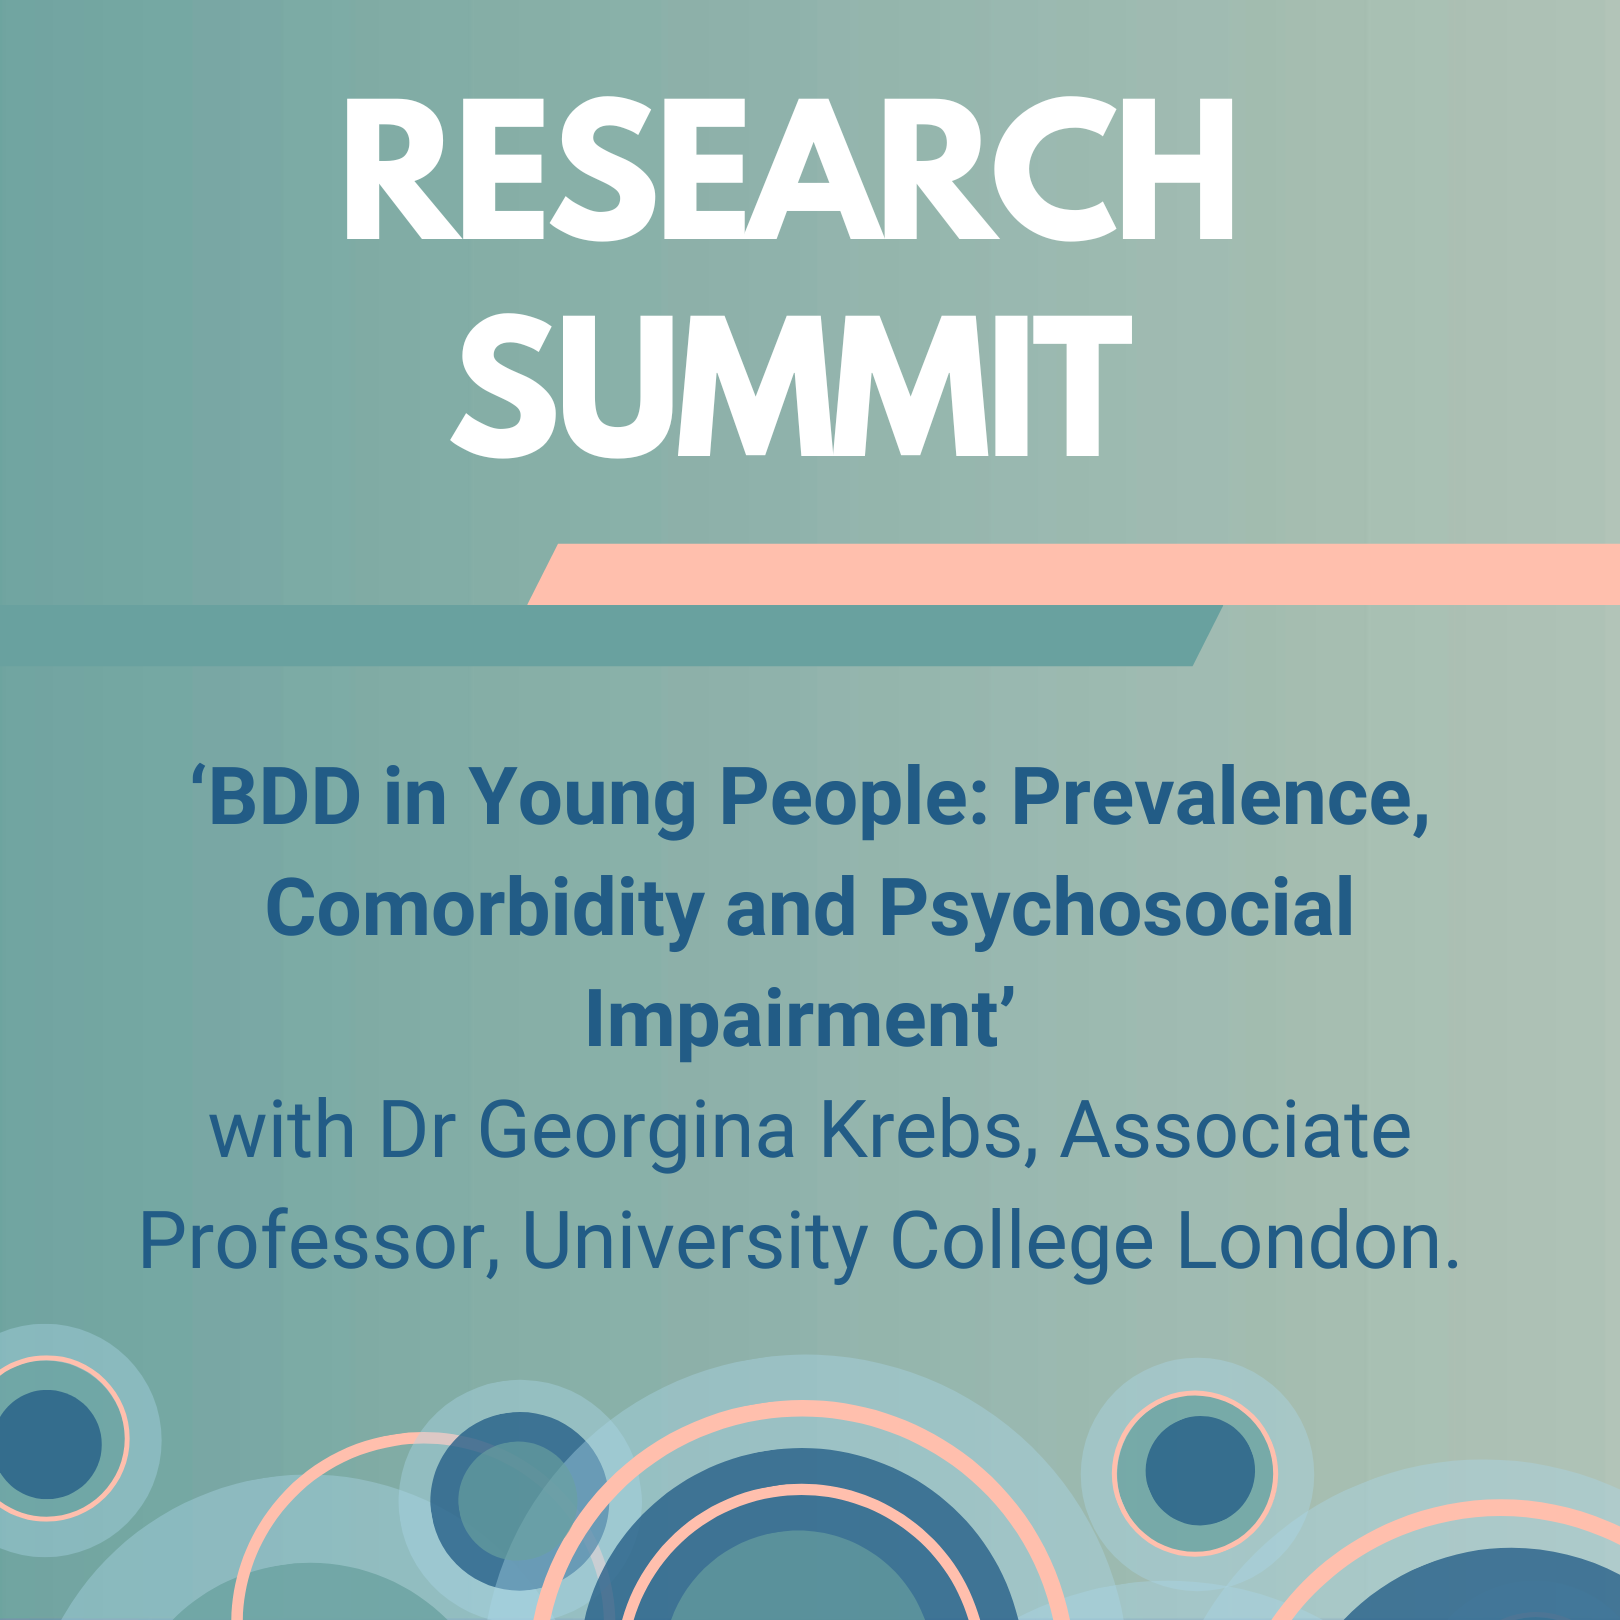 ‘BDD in young people: prevalence, comorbidity and psychosocial impairment’